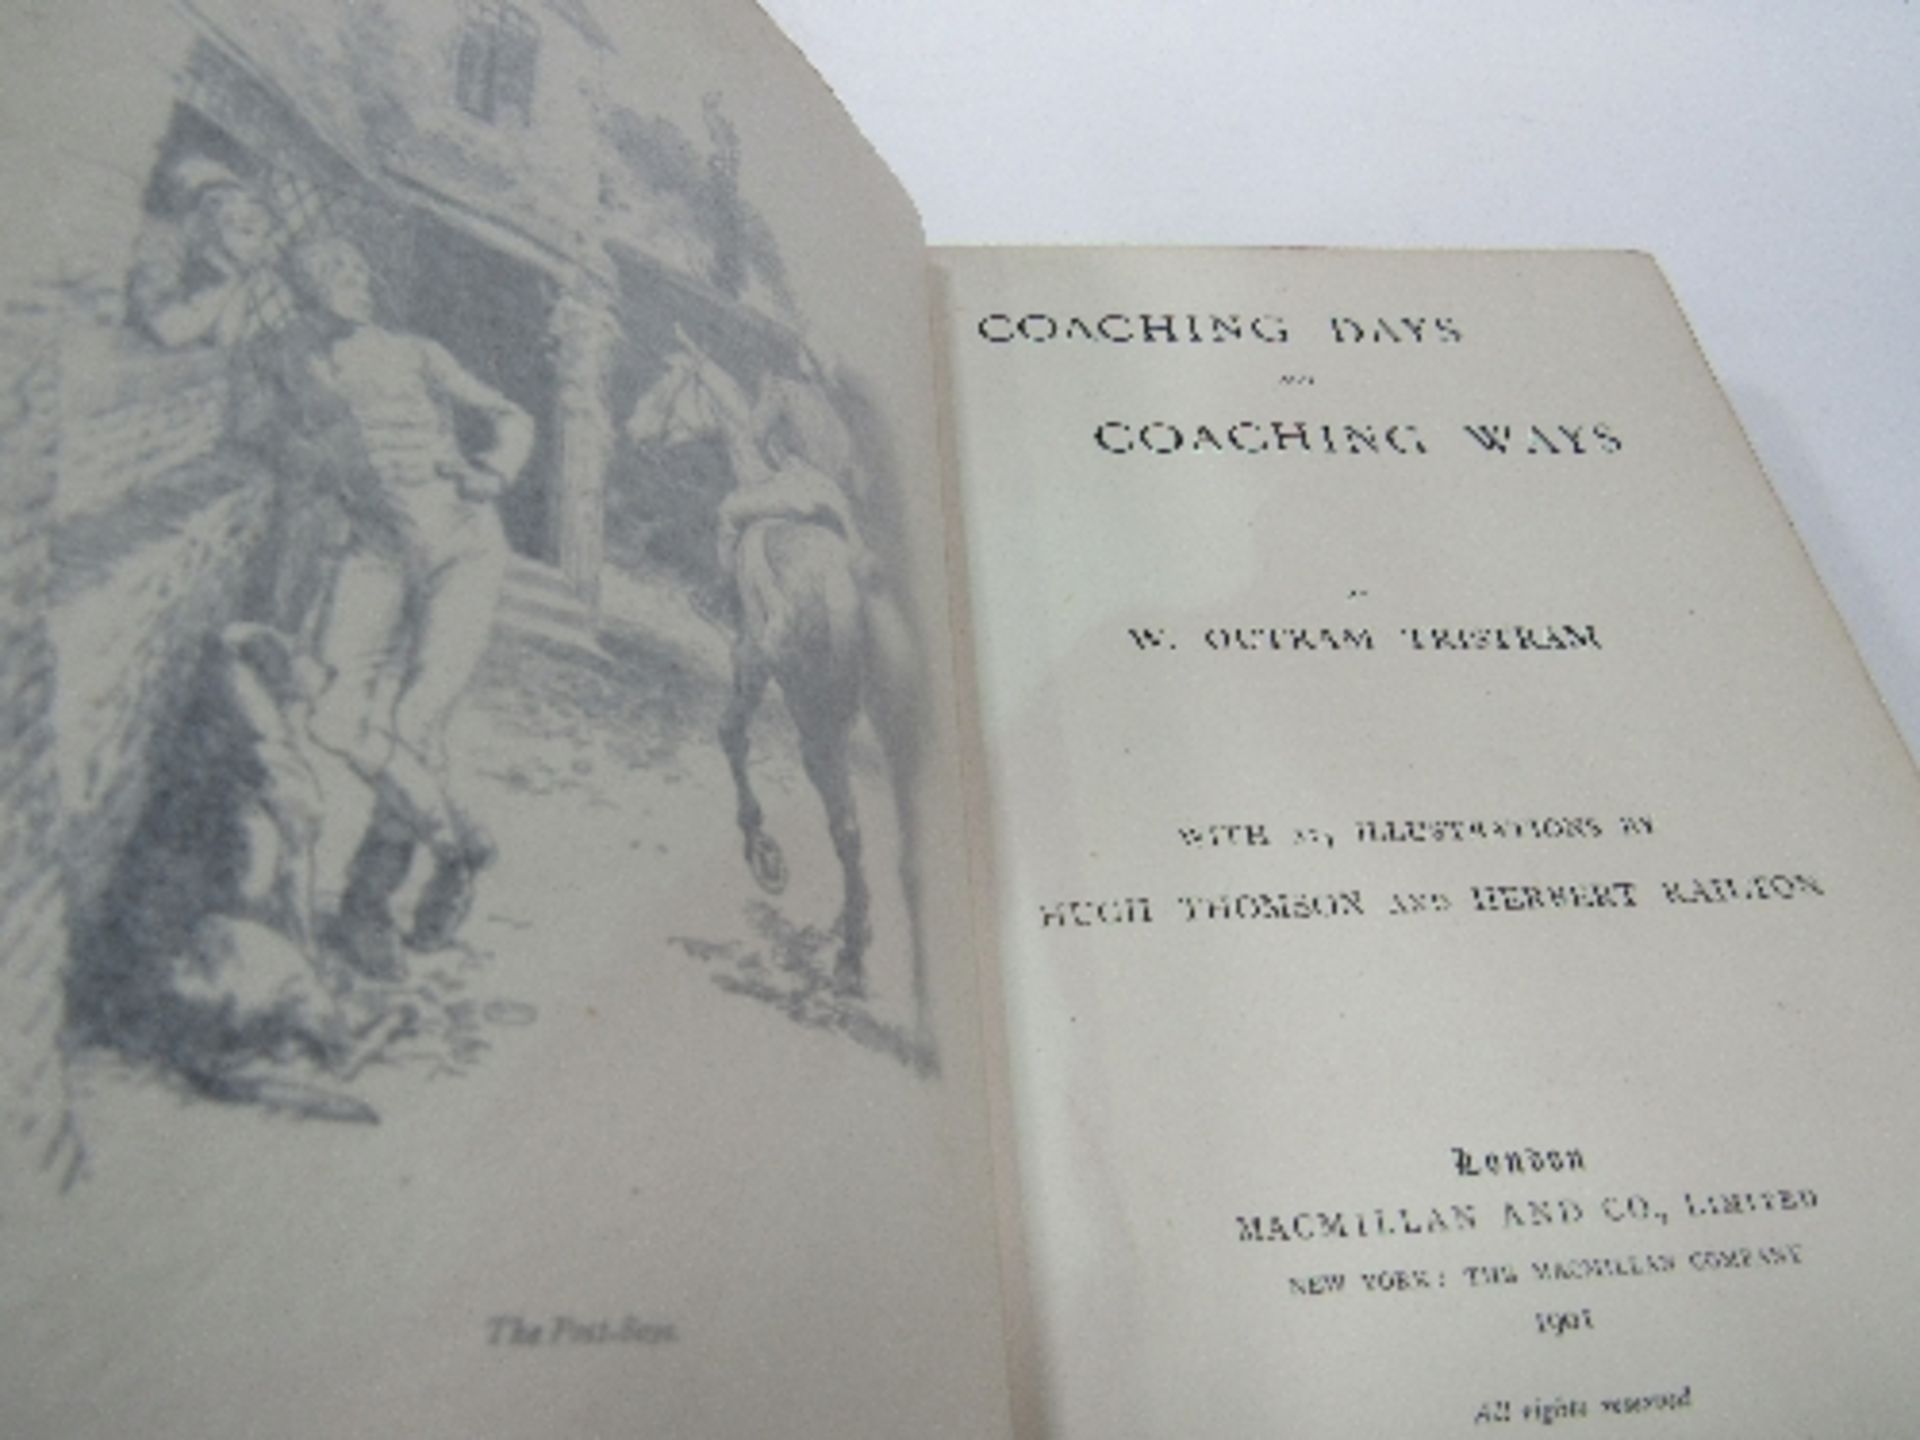 Coaching Days & Coaching Ways by W Outram Tristram, published by MacMillan & Co, 1901 - Image 3 of 3